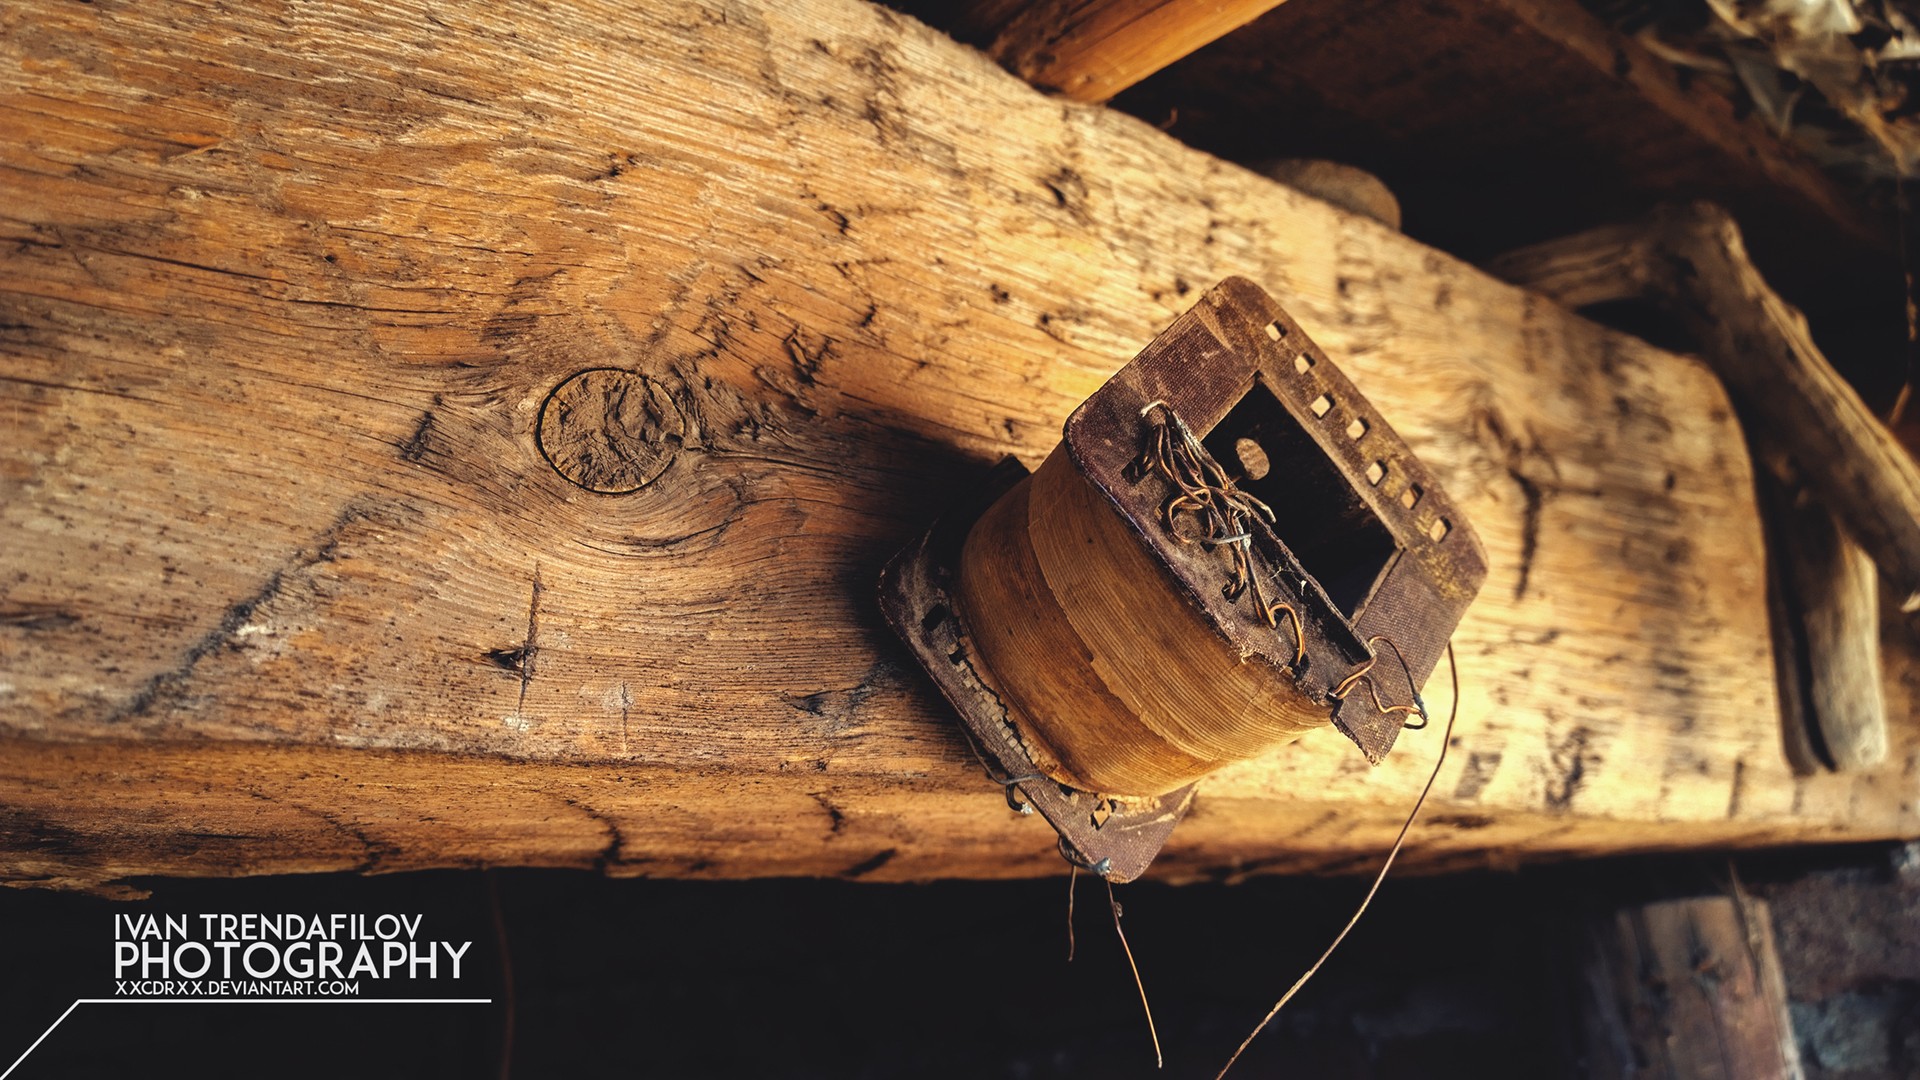 Vintage Copper Wood Photography 1920x1080